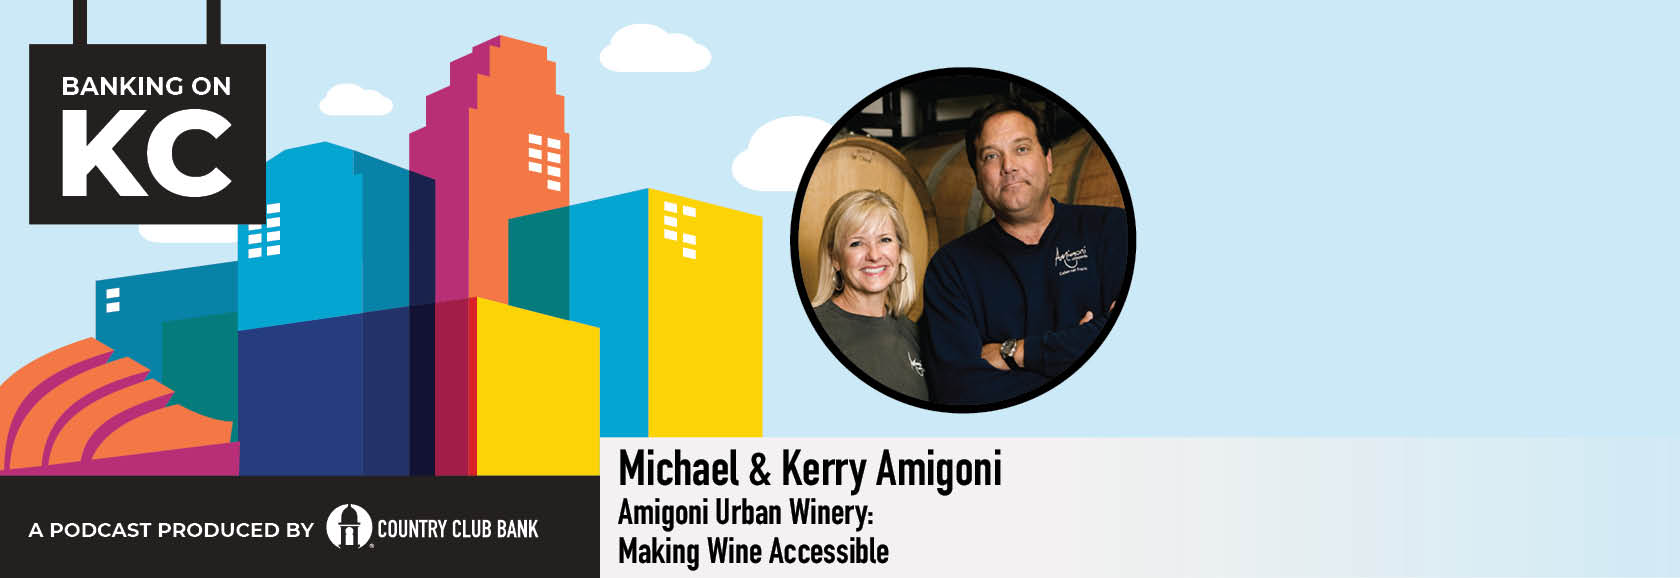 Banking on KC – Michael and Kerry Amigoni